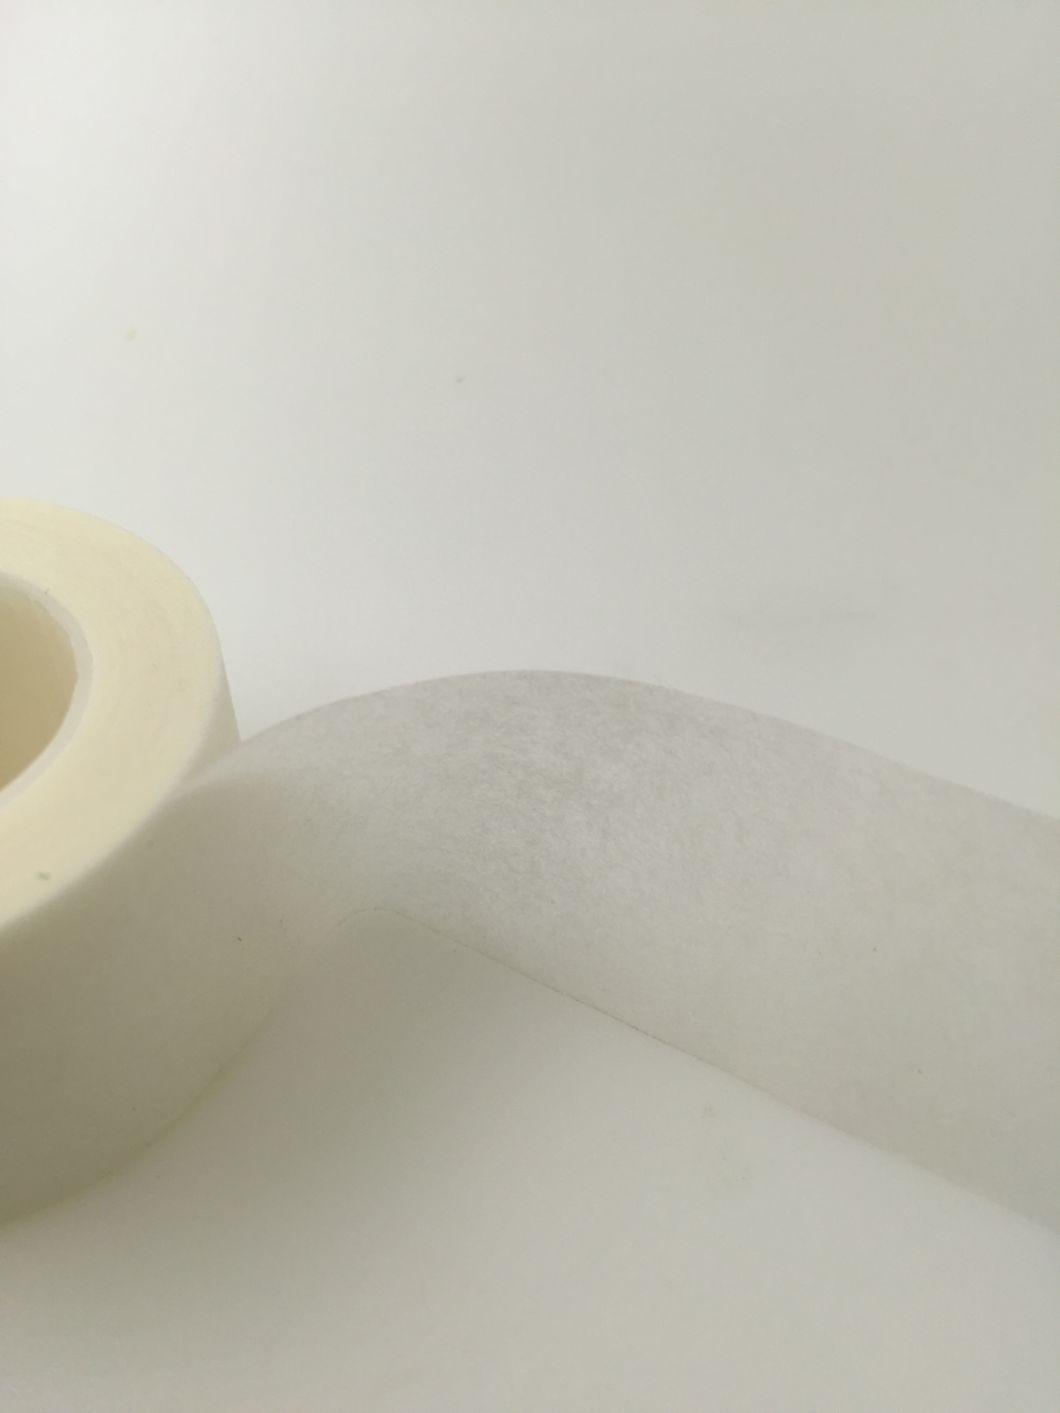 Microporous Medical Tape Adhesive Bandage, Hypoallergenic Self Adhesive Rolls, Paper Tape, Non-Woven Tape